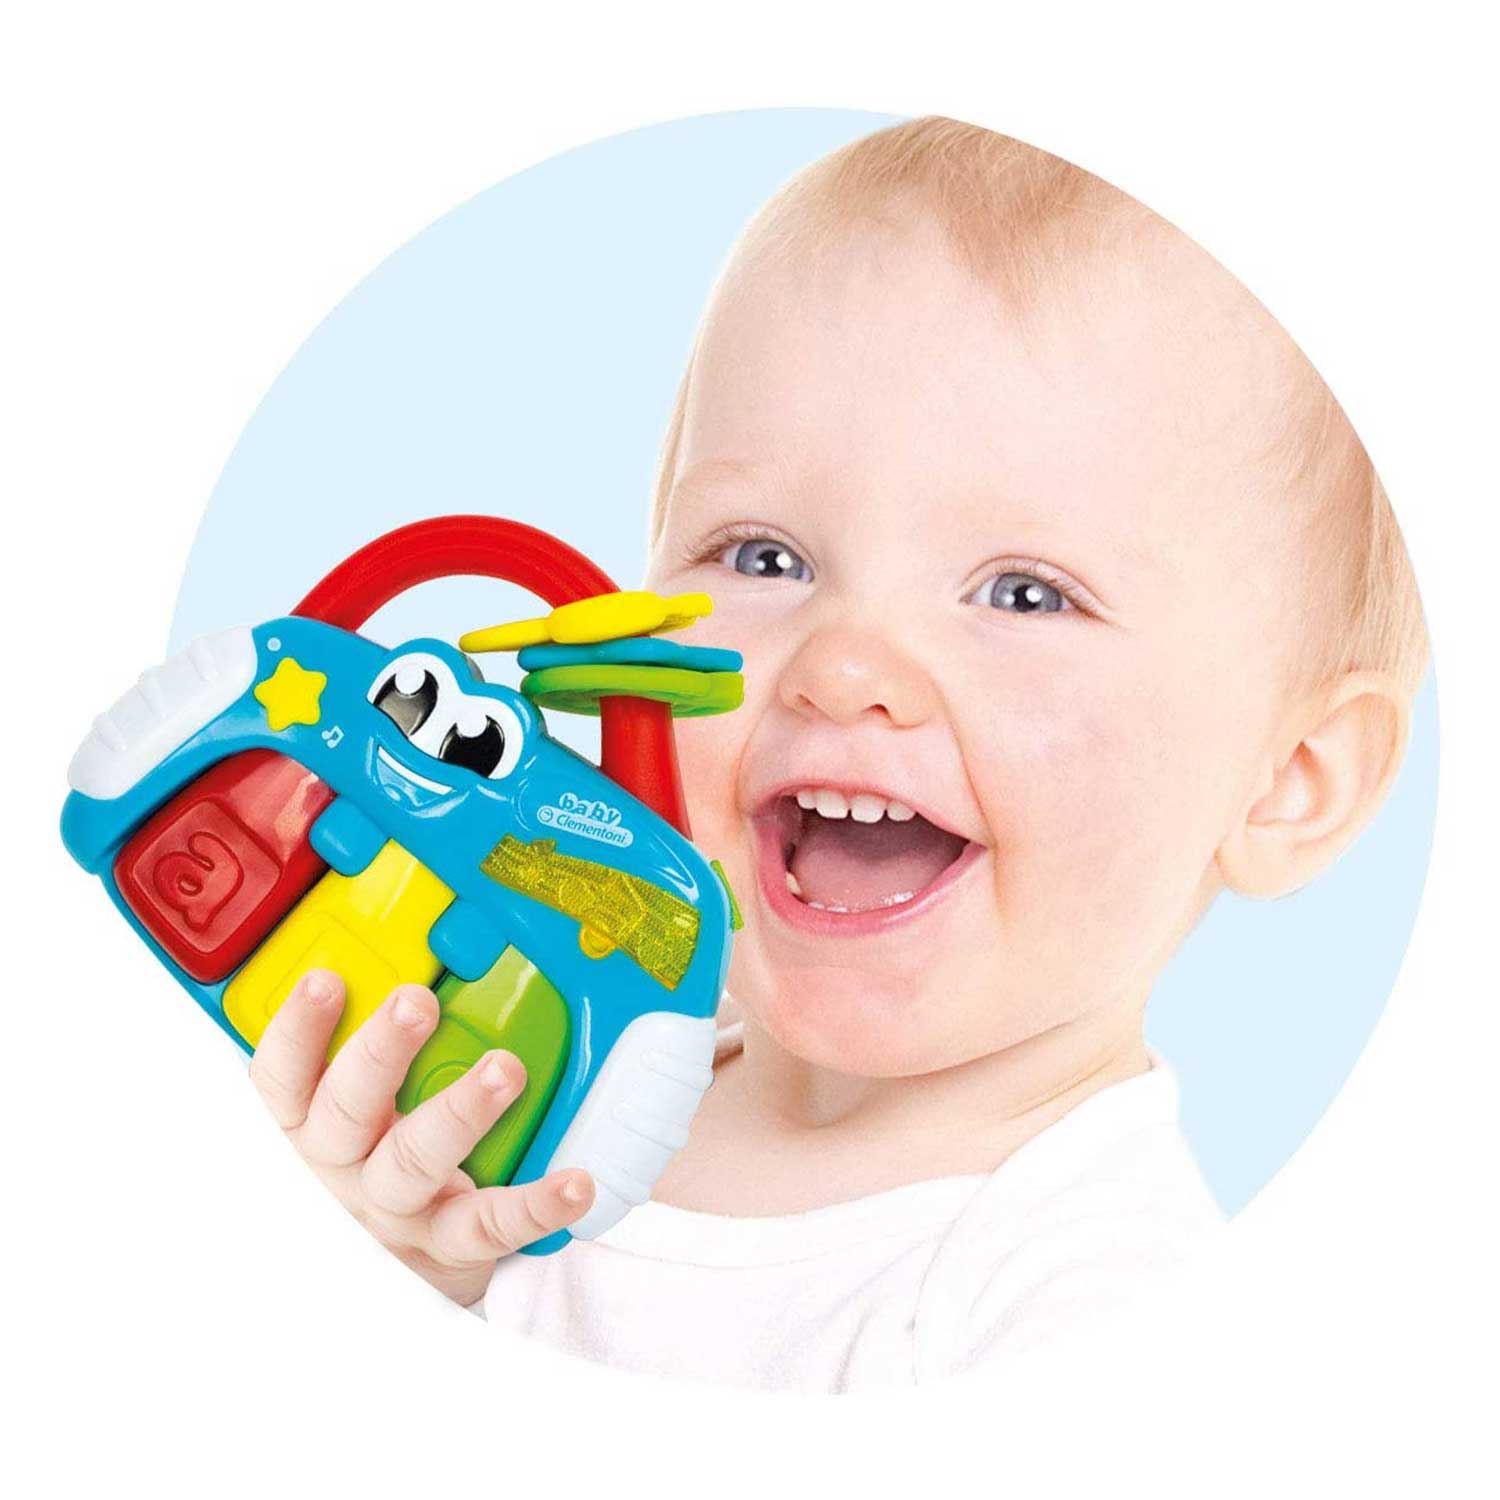 CLEMENTONI - Baby Interactive Electric Piano Rattle - Mod: CLM17221